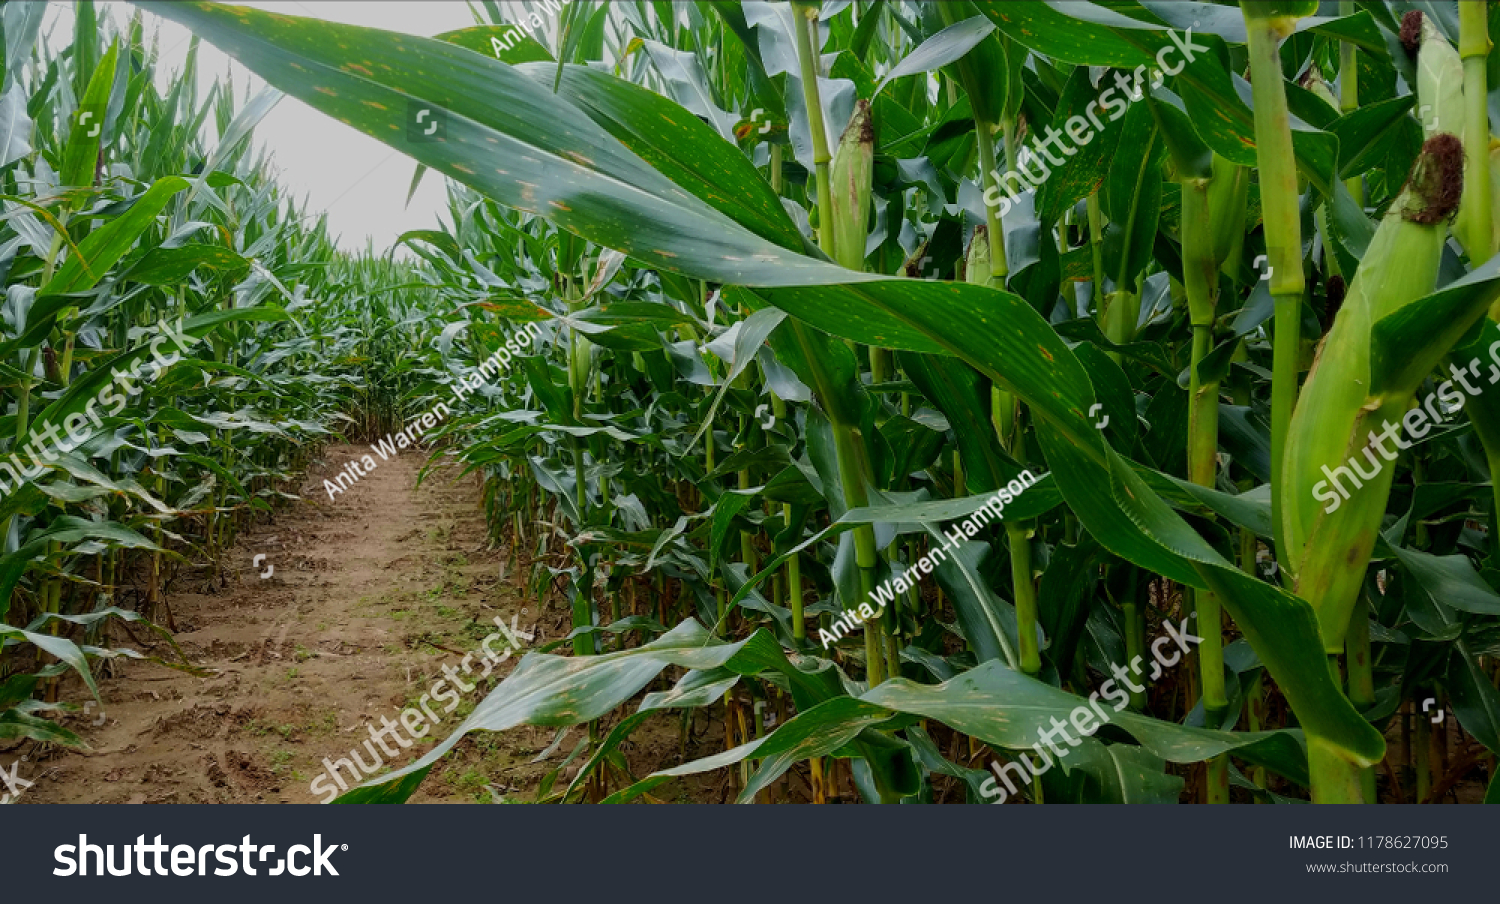 Looking Down One Long Row of Corn Plants in a Large Corn Maze #1178627095